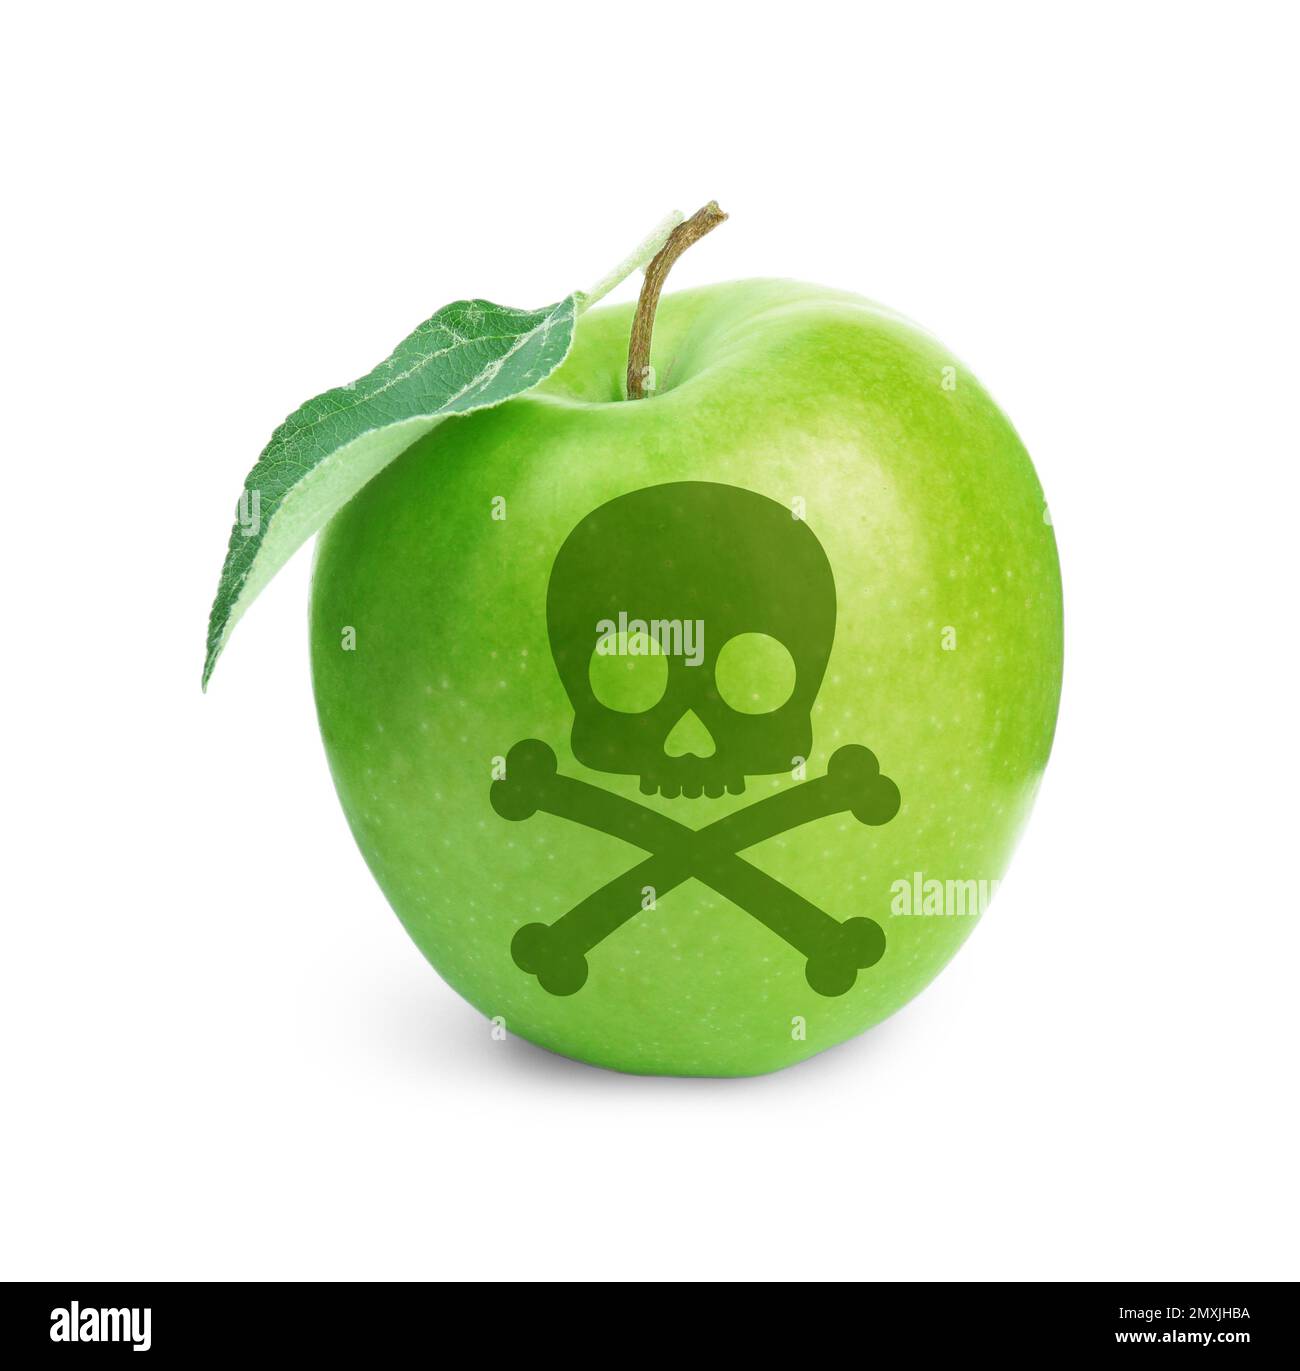 Green poison apple with skull and crossbones image on white background Stock Photo